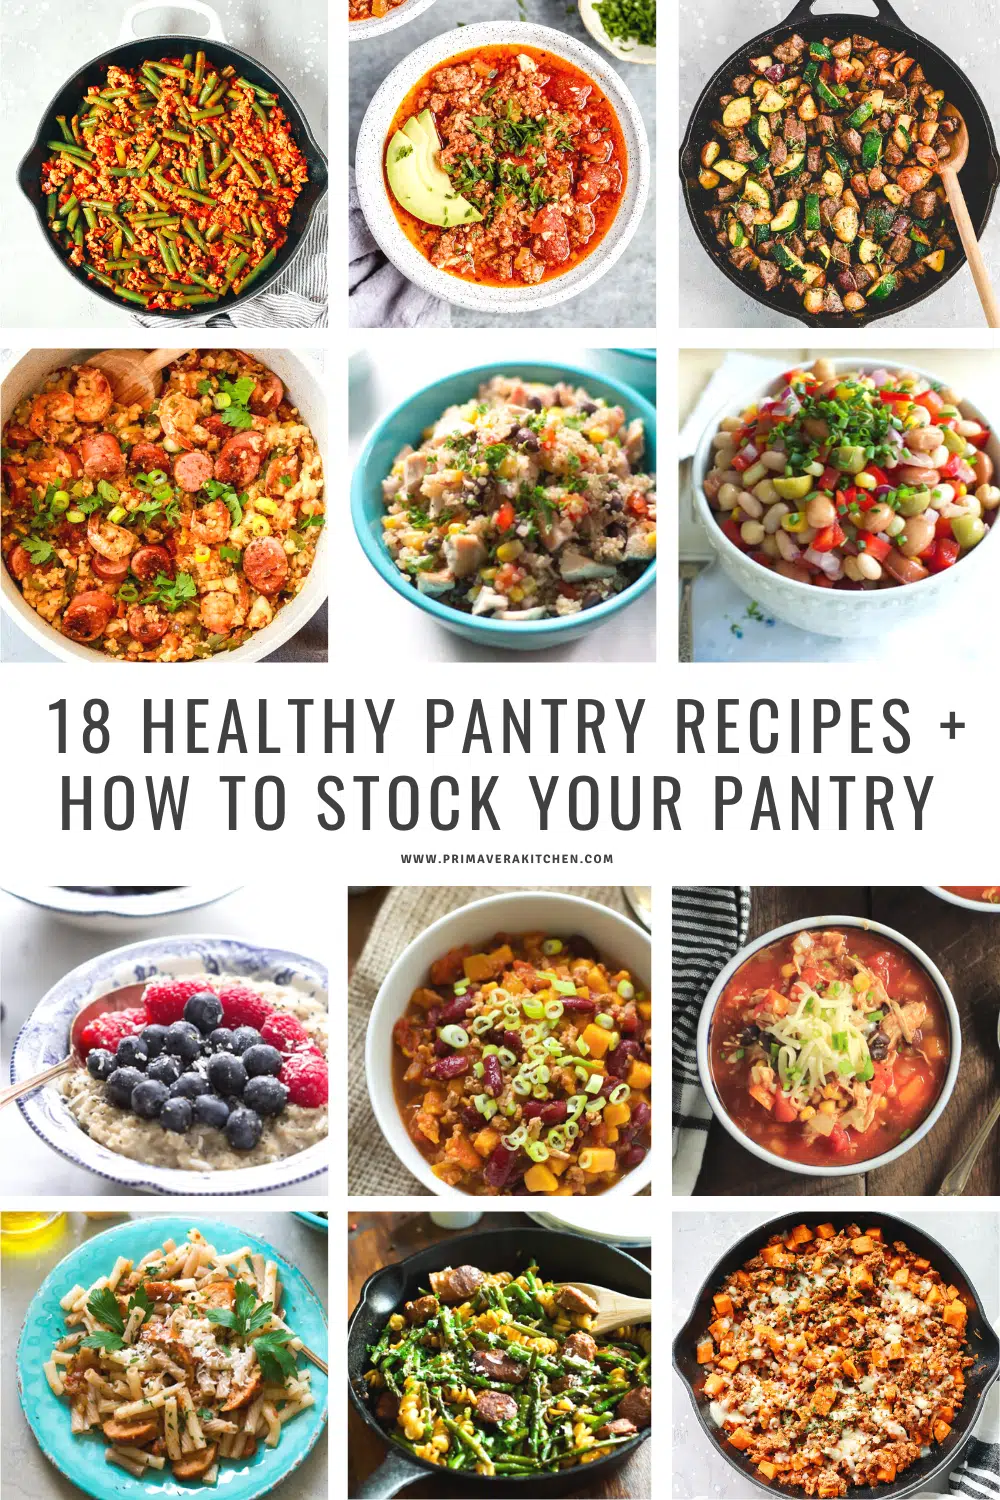 titled photo collage (and shown): 18 healthy pantry recipes plus how to stock your pantry